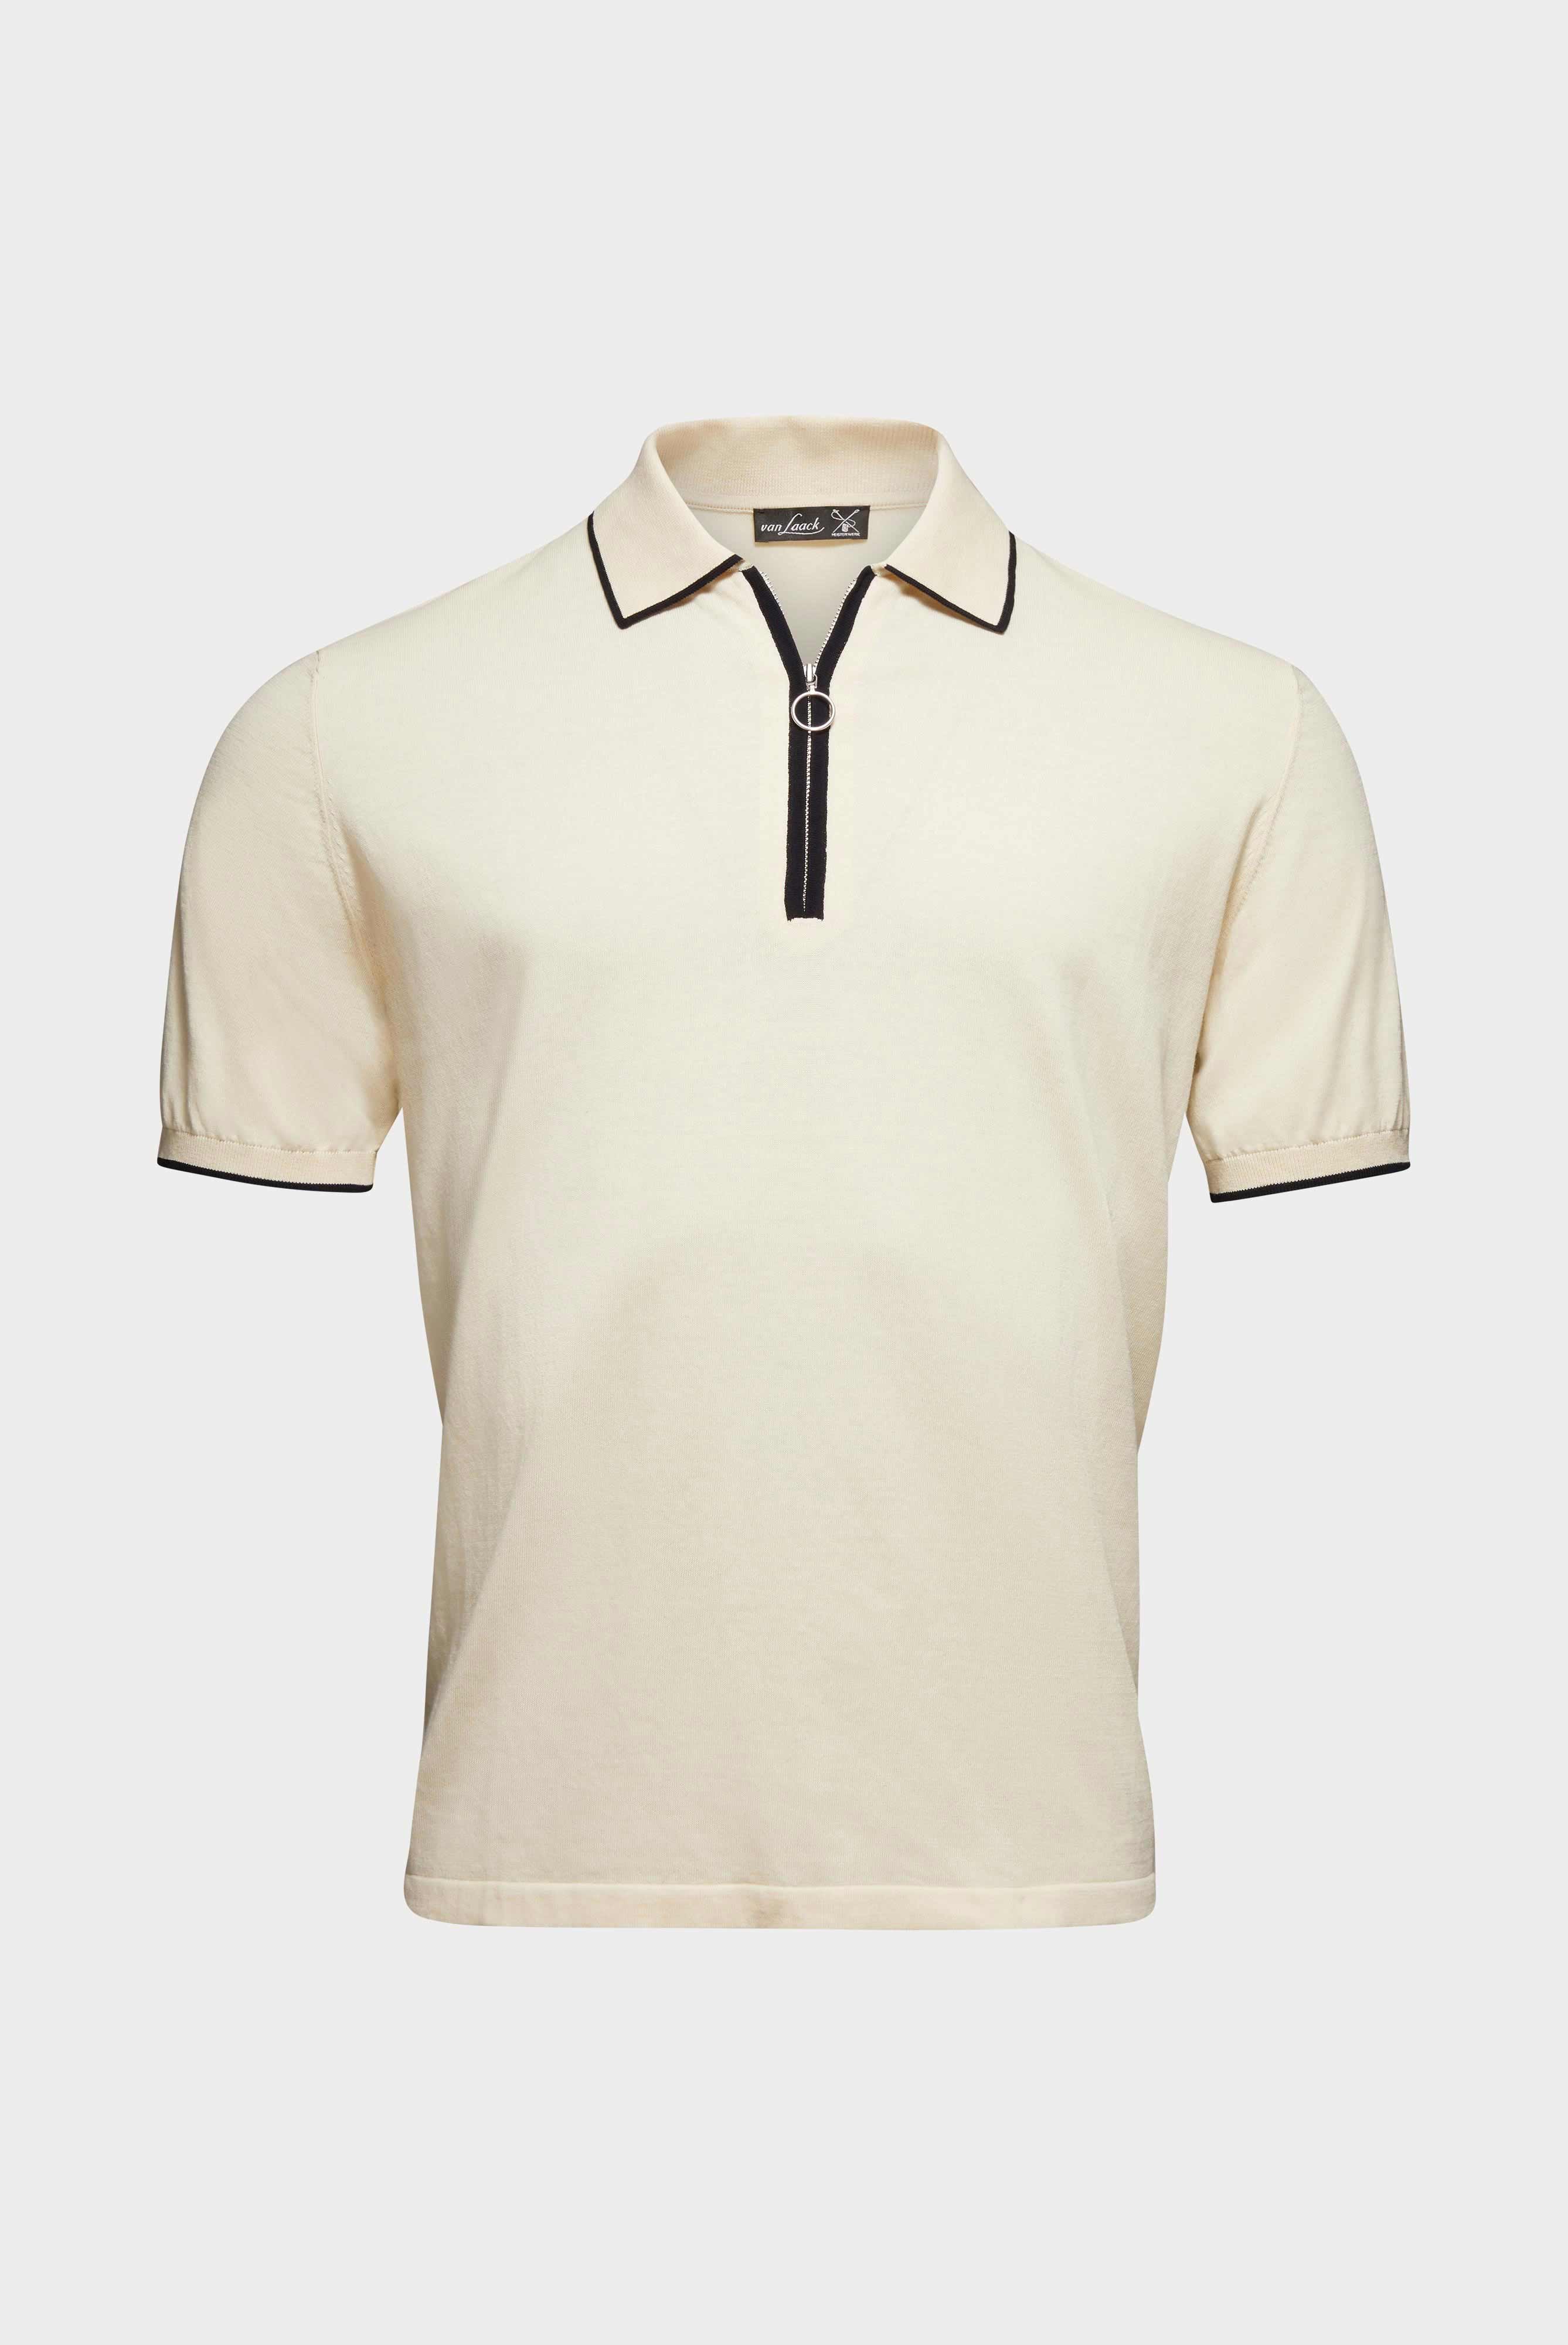 Poloshirts+Zip Knit-Polo in Air Cotton+82.8647.S7.S00174.120.L